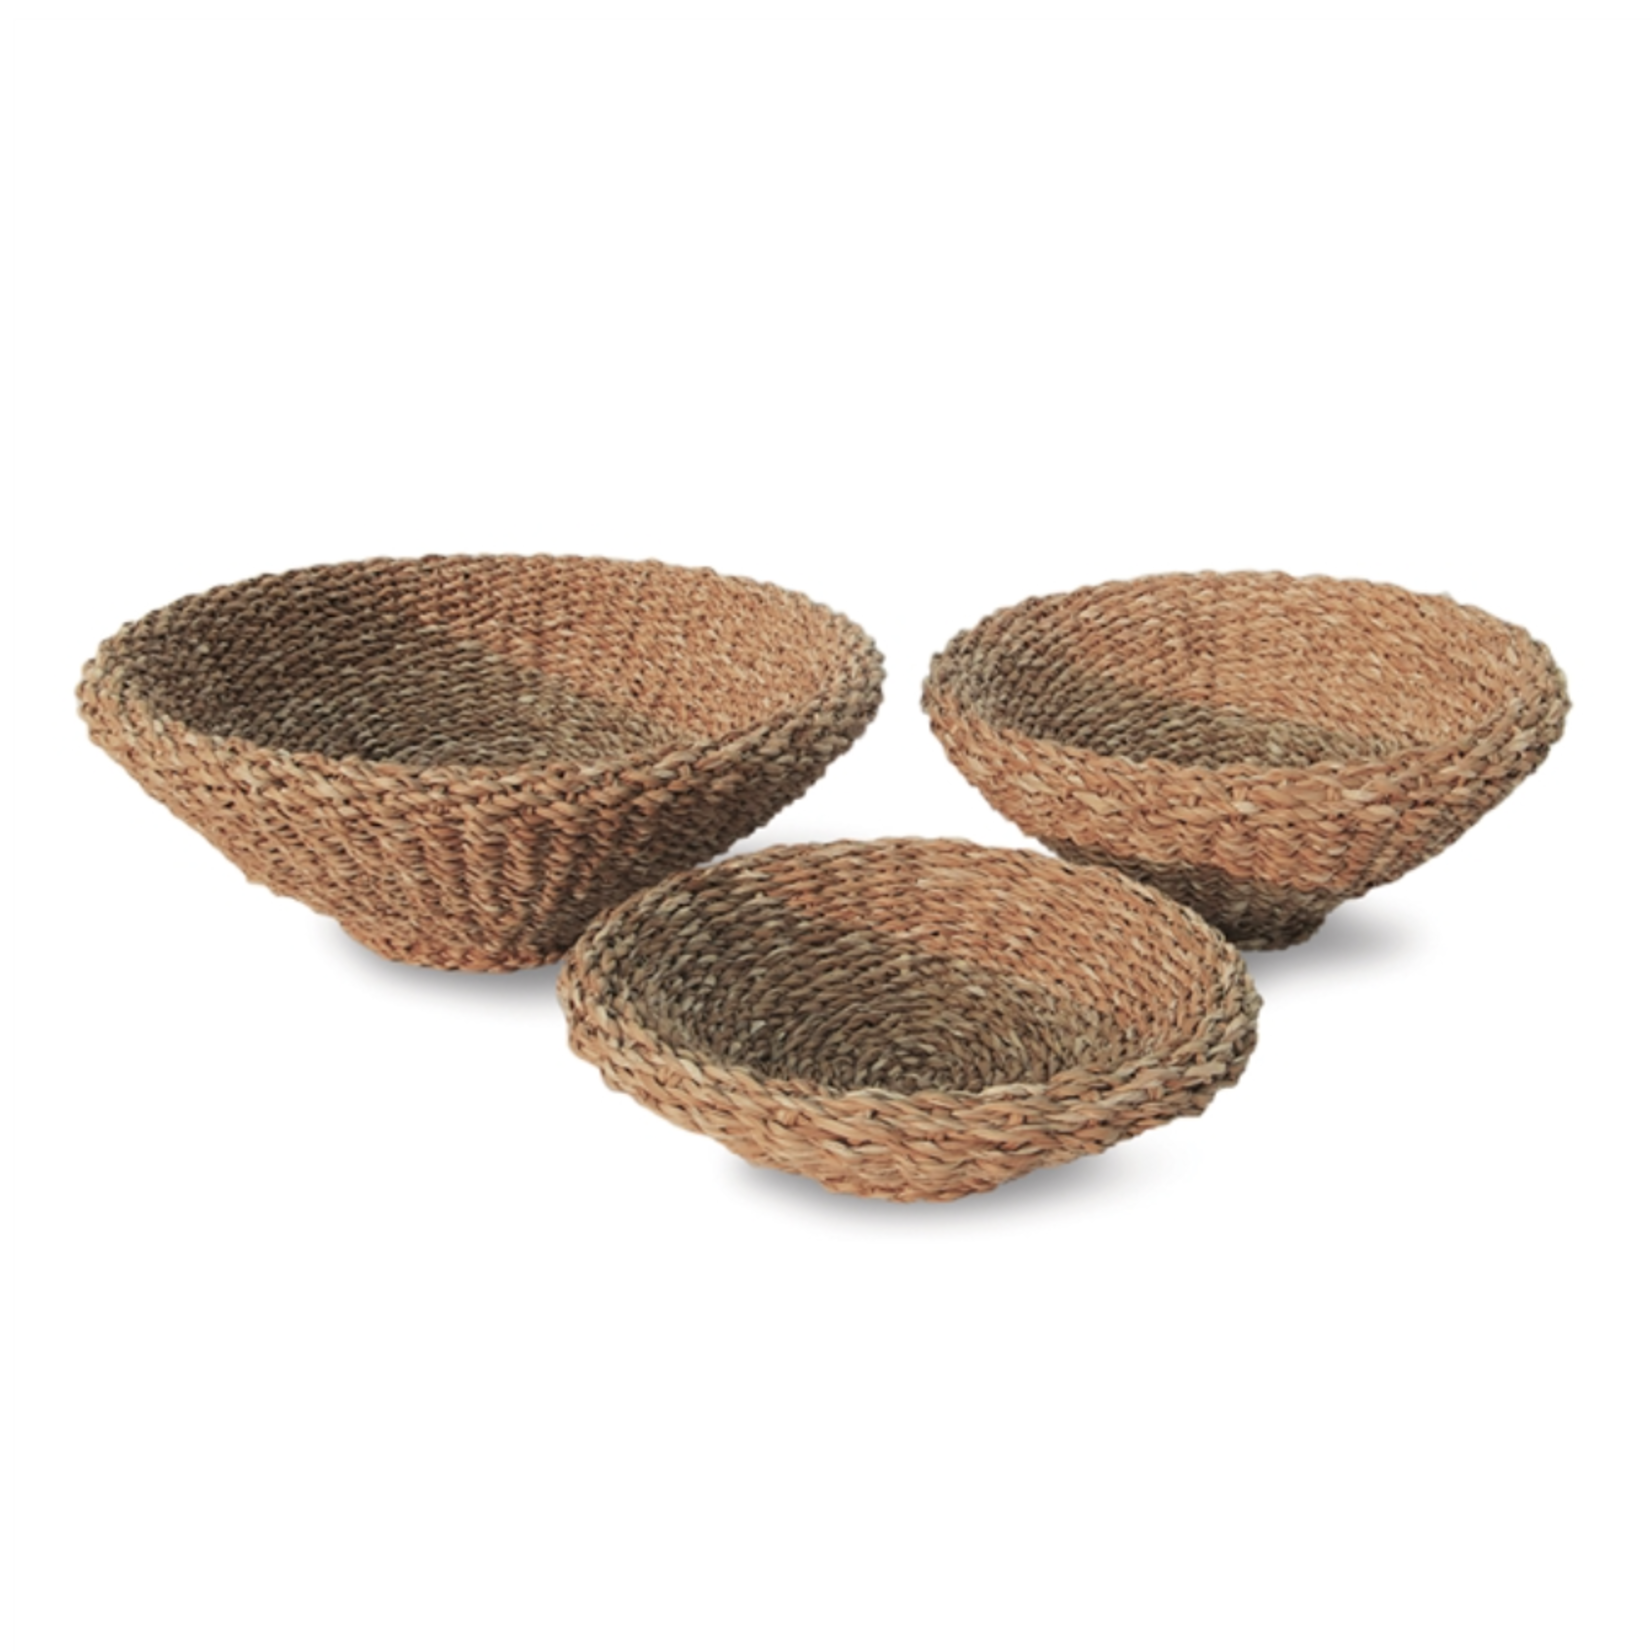 Outside The Box 6", 5" & 4" Set Of 3 Seagrass Shallow Tapered Baskets